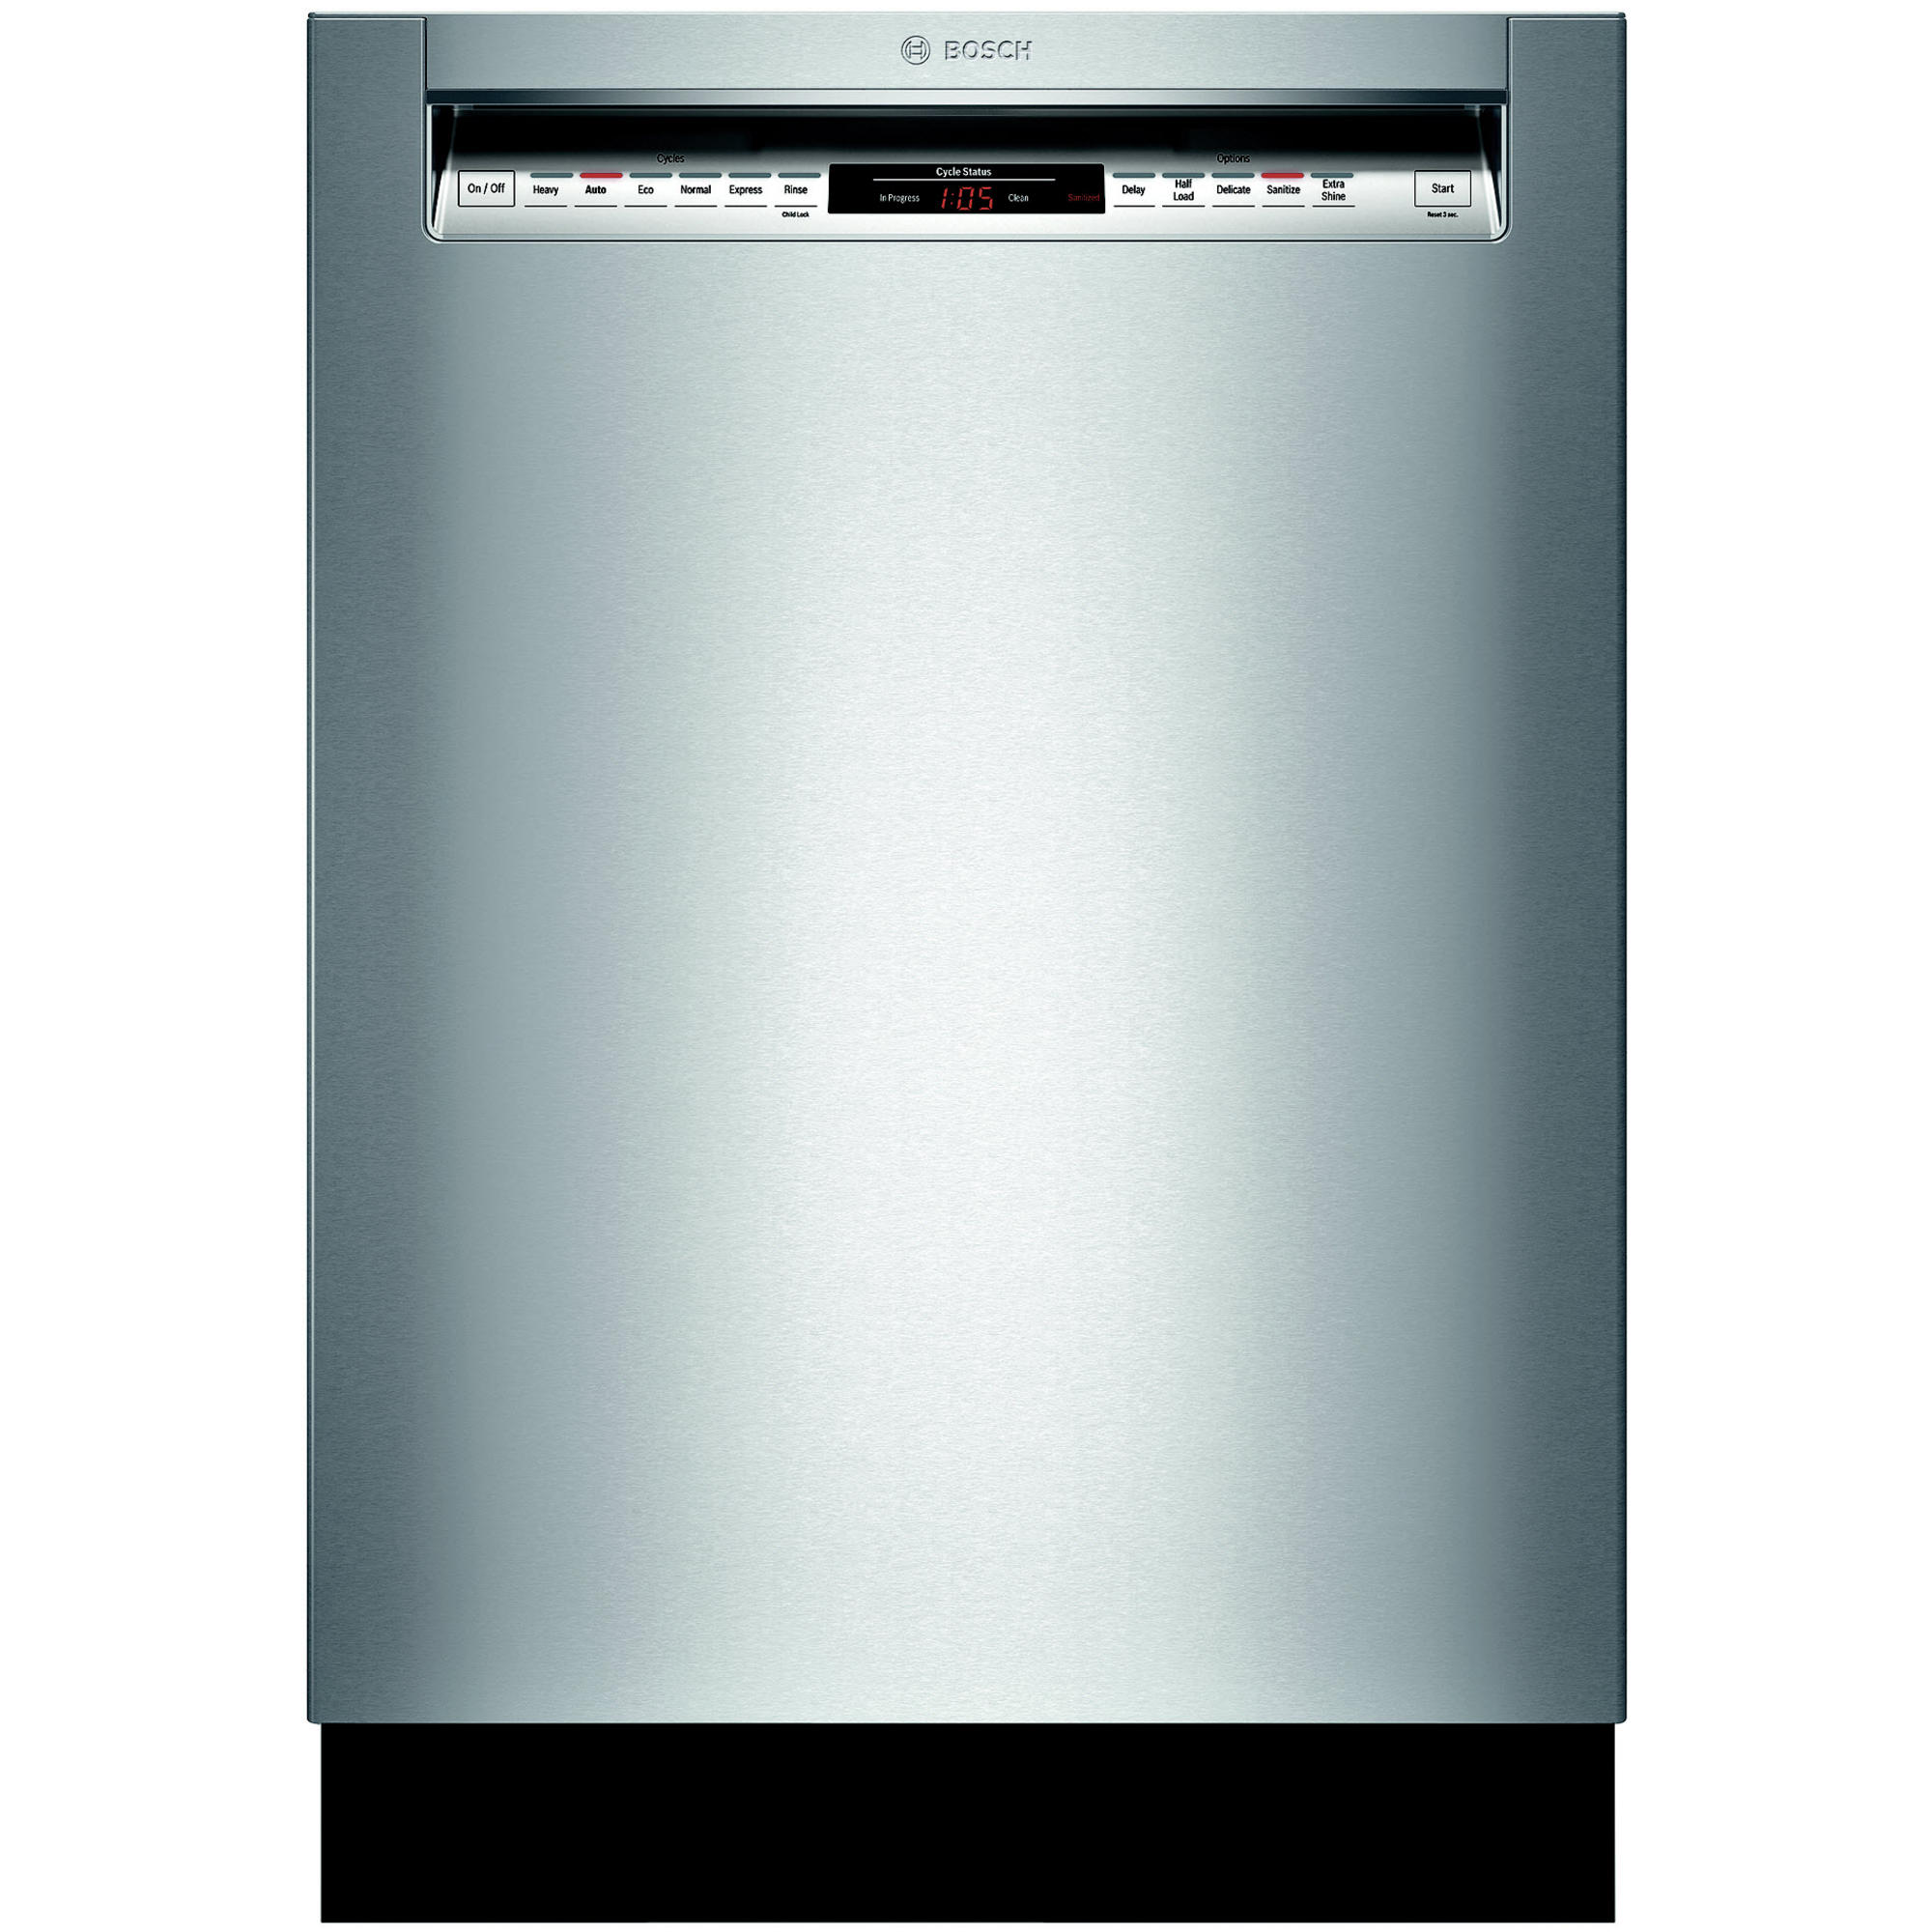 Does a Bosch service manual come with the initial purchase of a dishwasher?